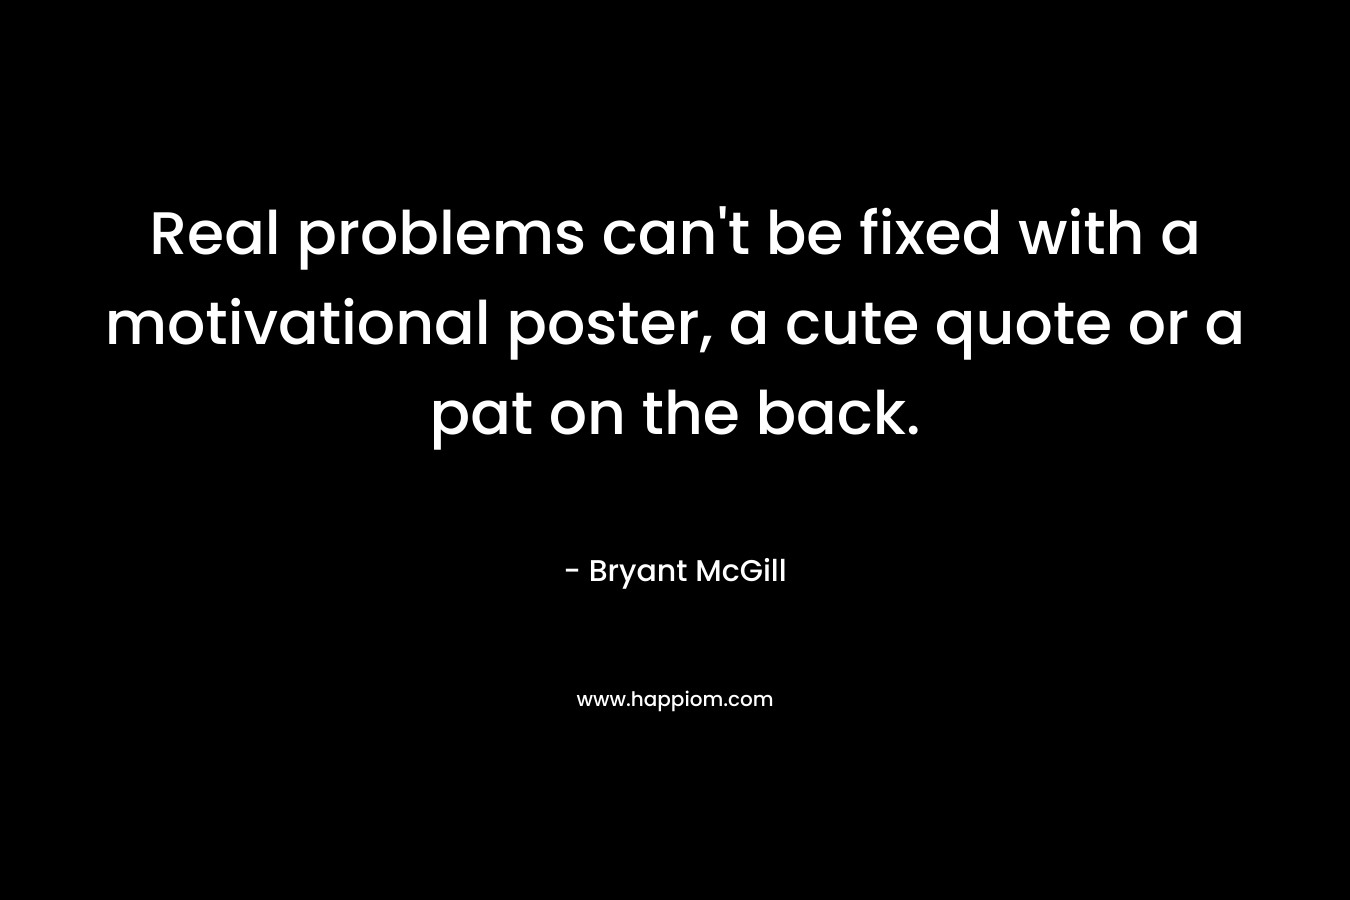 Real problems can't be fixed with a motivational poster, a cute quote or a pat on the back.